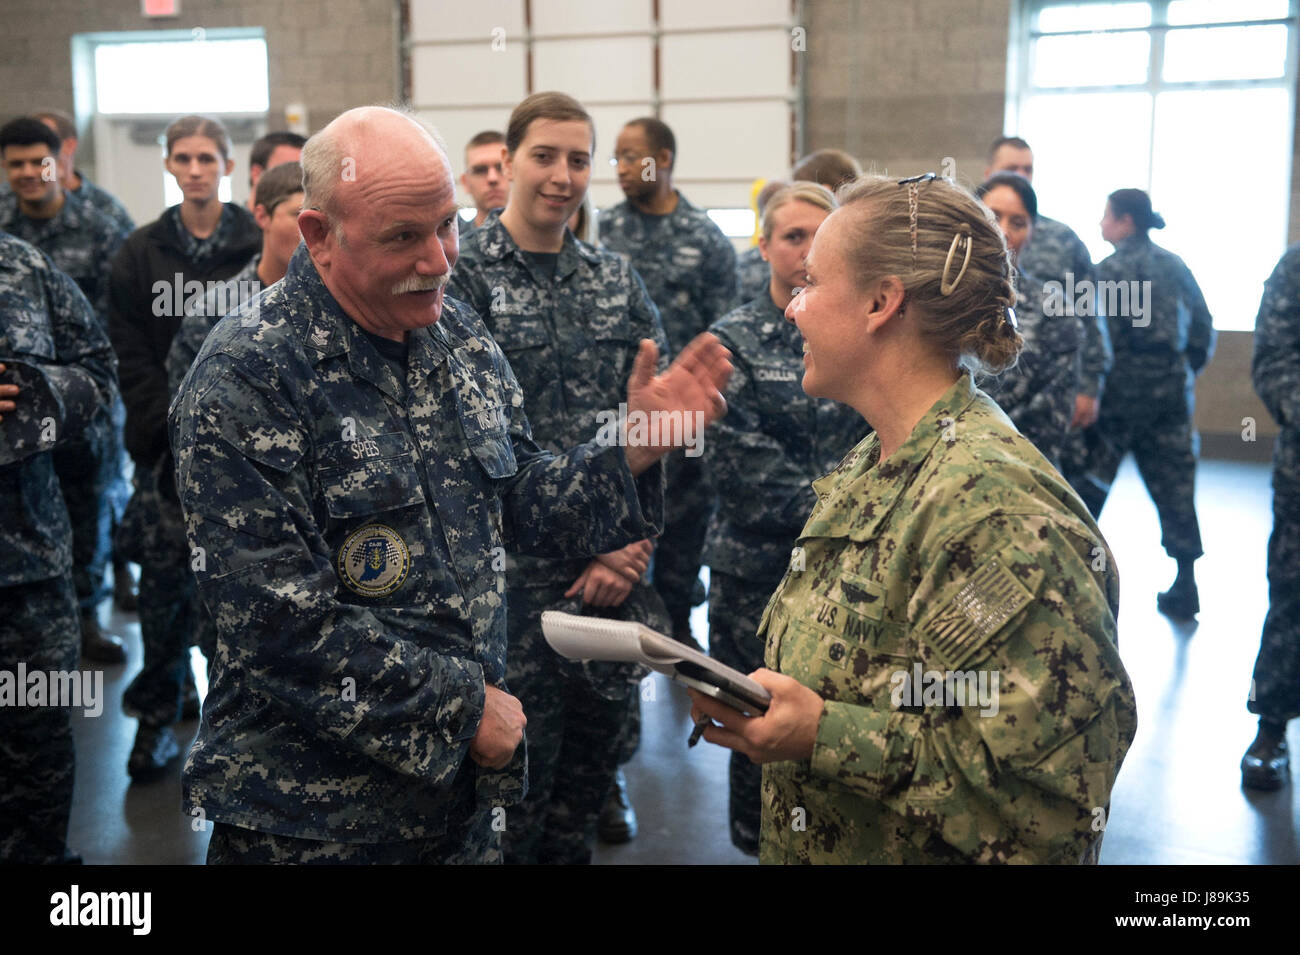 170520-N-QP351-087 INDIANAPOLIS (May 20, 2017) Rear Admiral Linda Wackerman, Deputy Commander, U.S. Naval Forces Southern Command, 4th Fleet, congratulates Culinary Spacialist 1st Class Thomas Spees, from Navy Operational Support Center Indianapolis, for over 38 years of service during an Admirals Call. Wackerman who also serves as the flag mentor for NOSC Indianapolis, held an all-hands Q&A session for E-6 and below Sailors to address upcoming changes and get feedback regarding Navy-related issues they feel need to be improved. (U.S. Navy photo by Mass Communication Specialist 2nd Class (SW/E Stock Photo